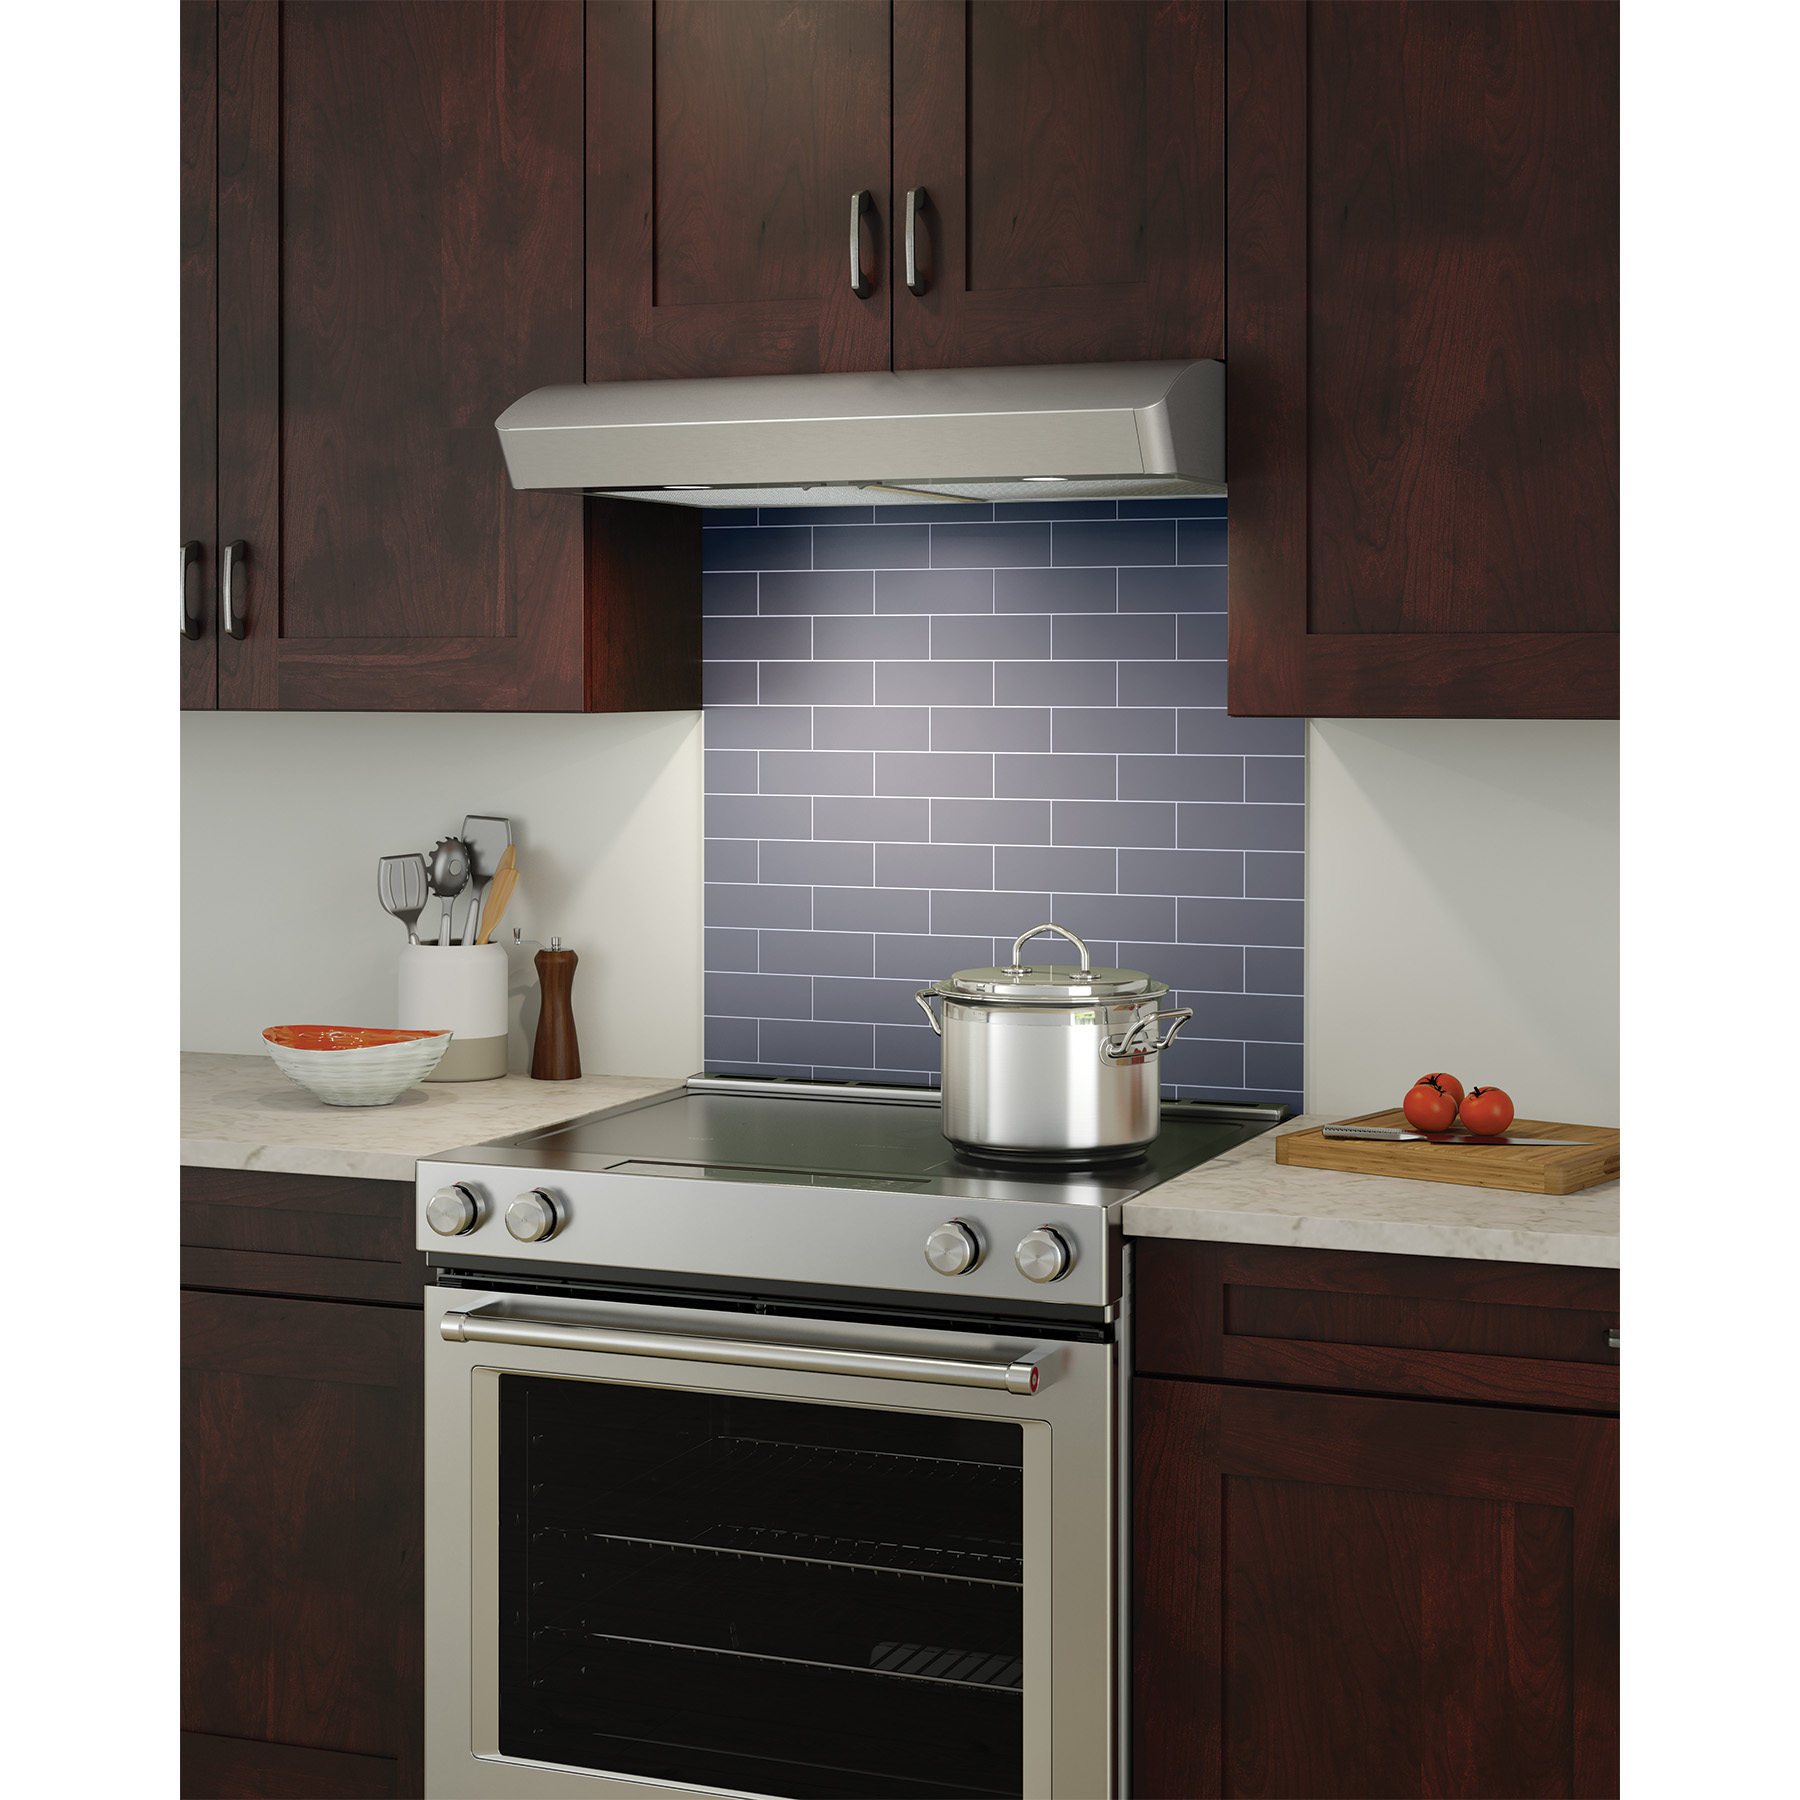 CLSC230SS Broan Broan® Antero 30-Inch Under-Cabinet Range Hood, 375 MAX  Blower CFM, Stainless Steel STAINLESS STEEL - Metro Appliances & More